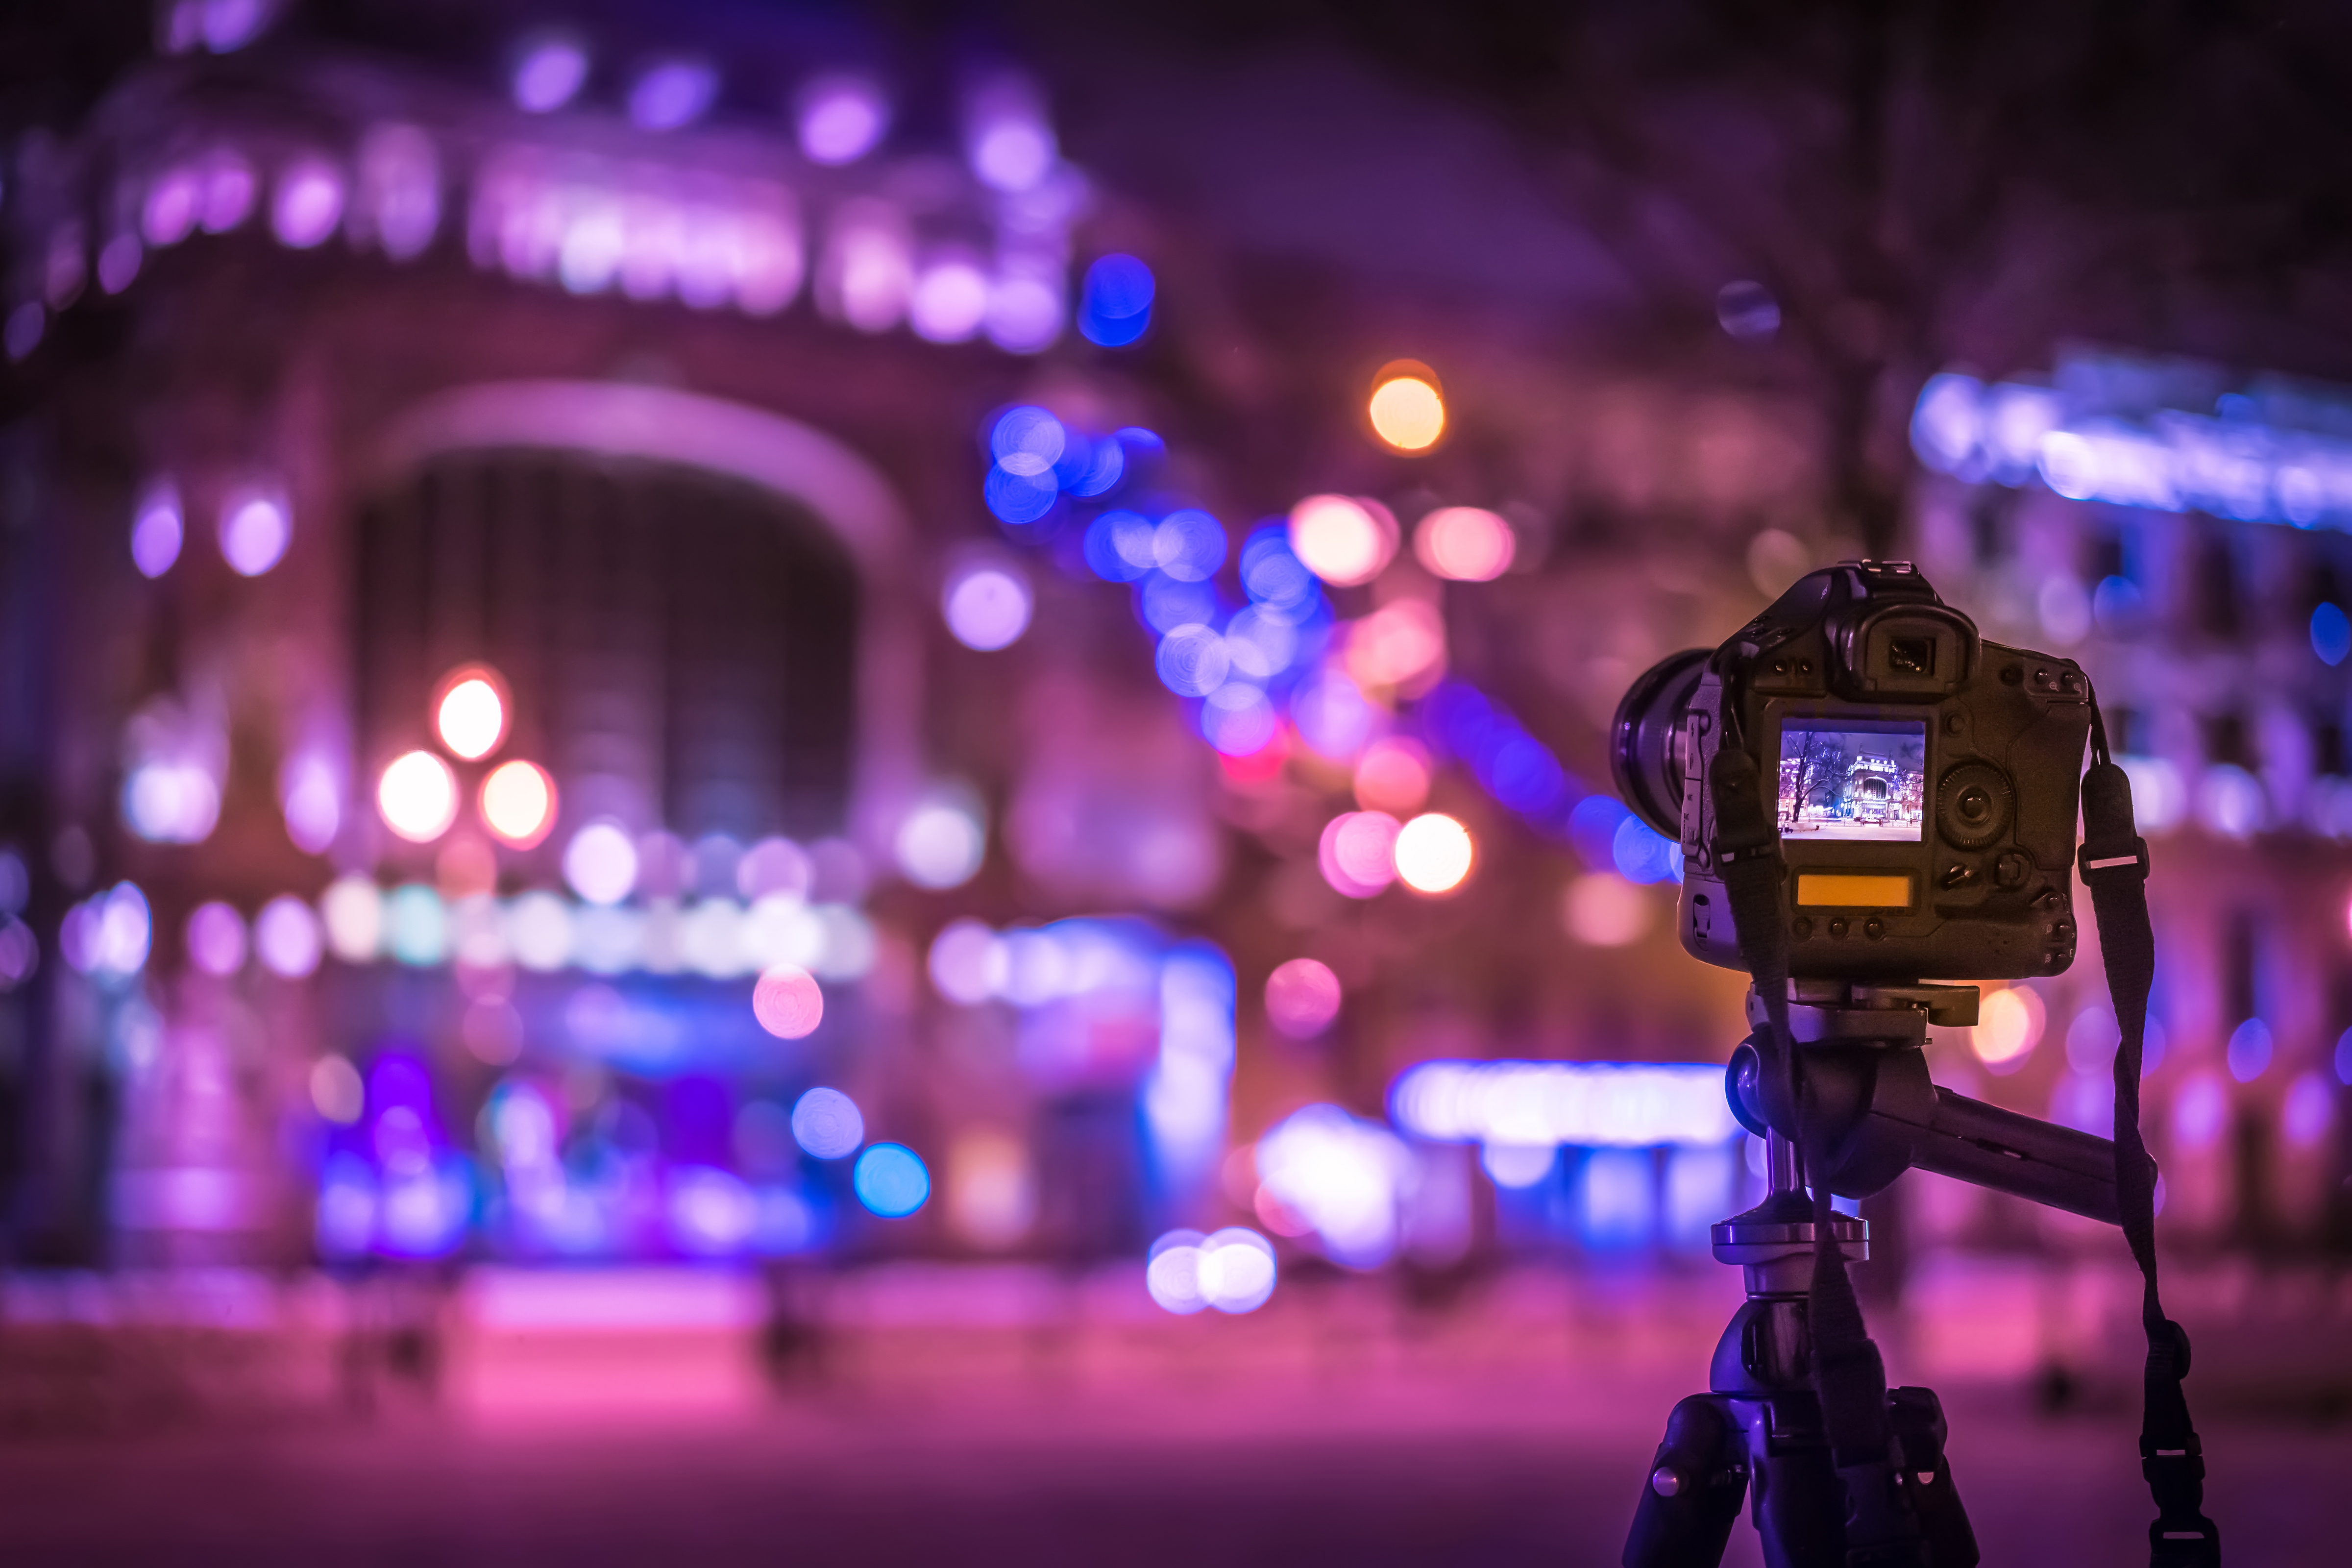 Tips for making the most of low light photography